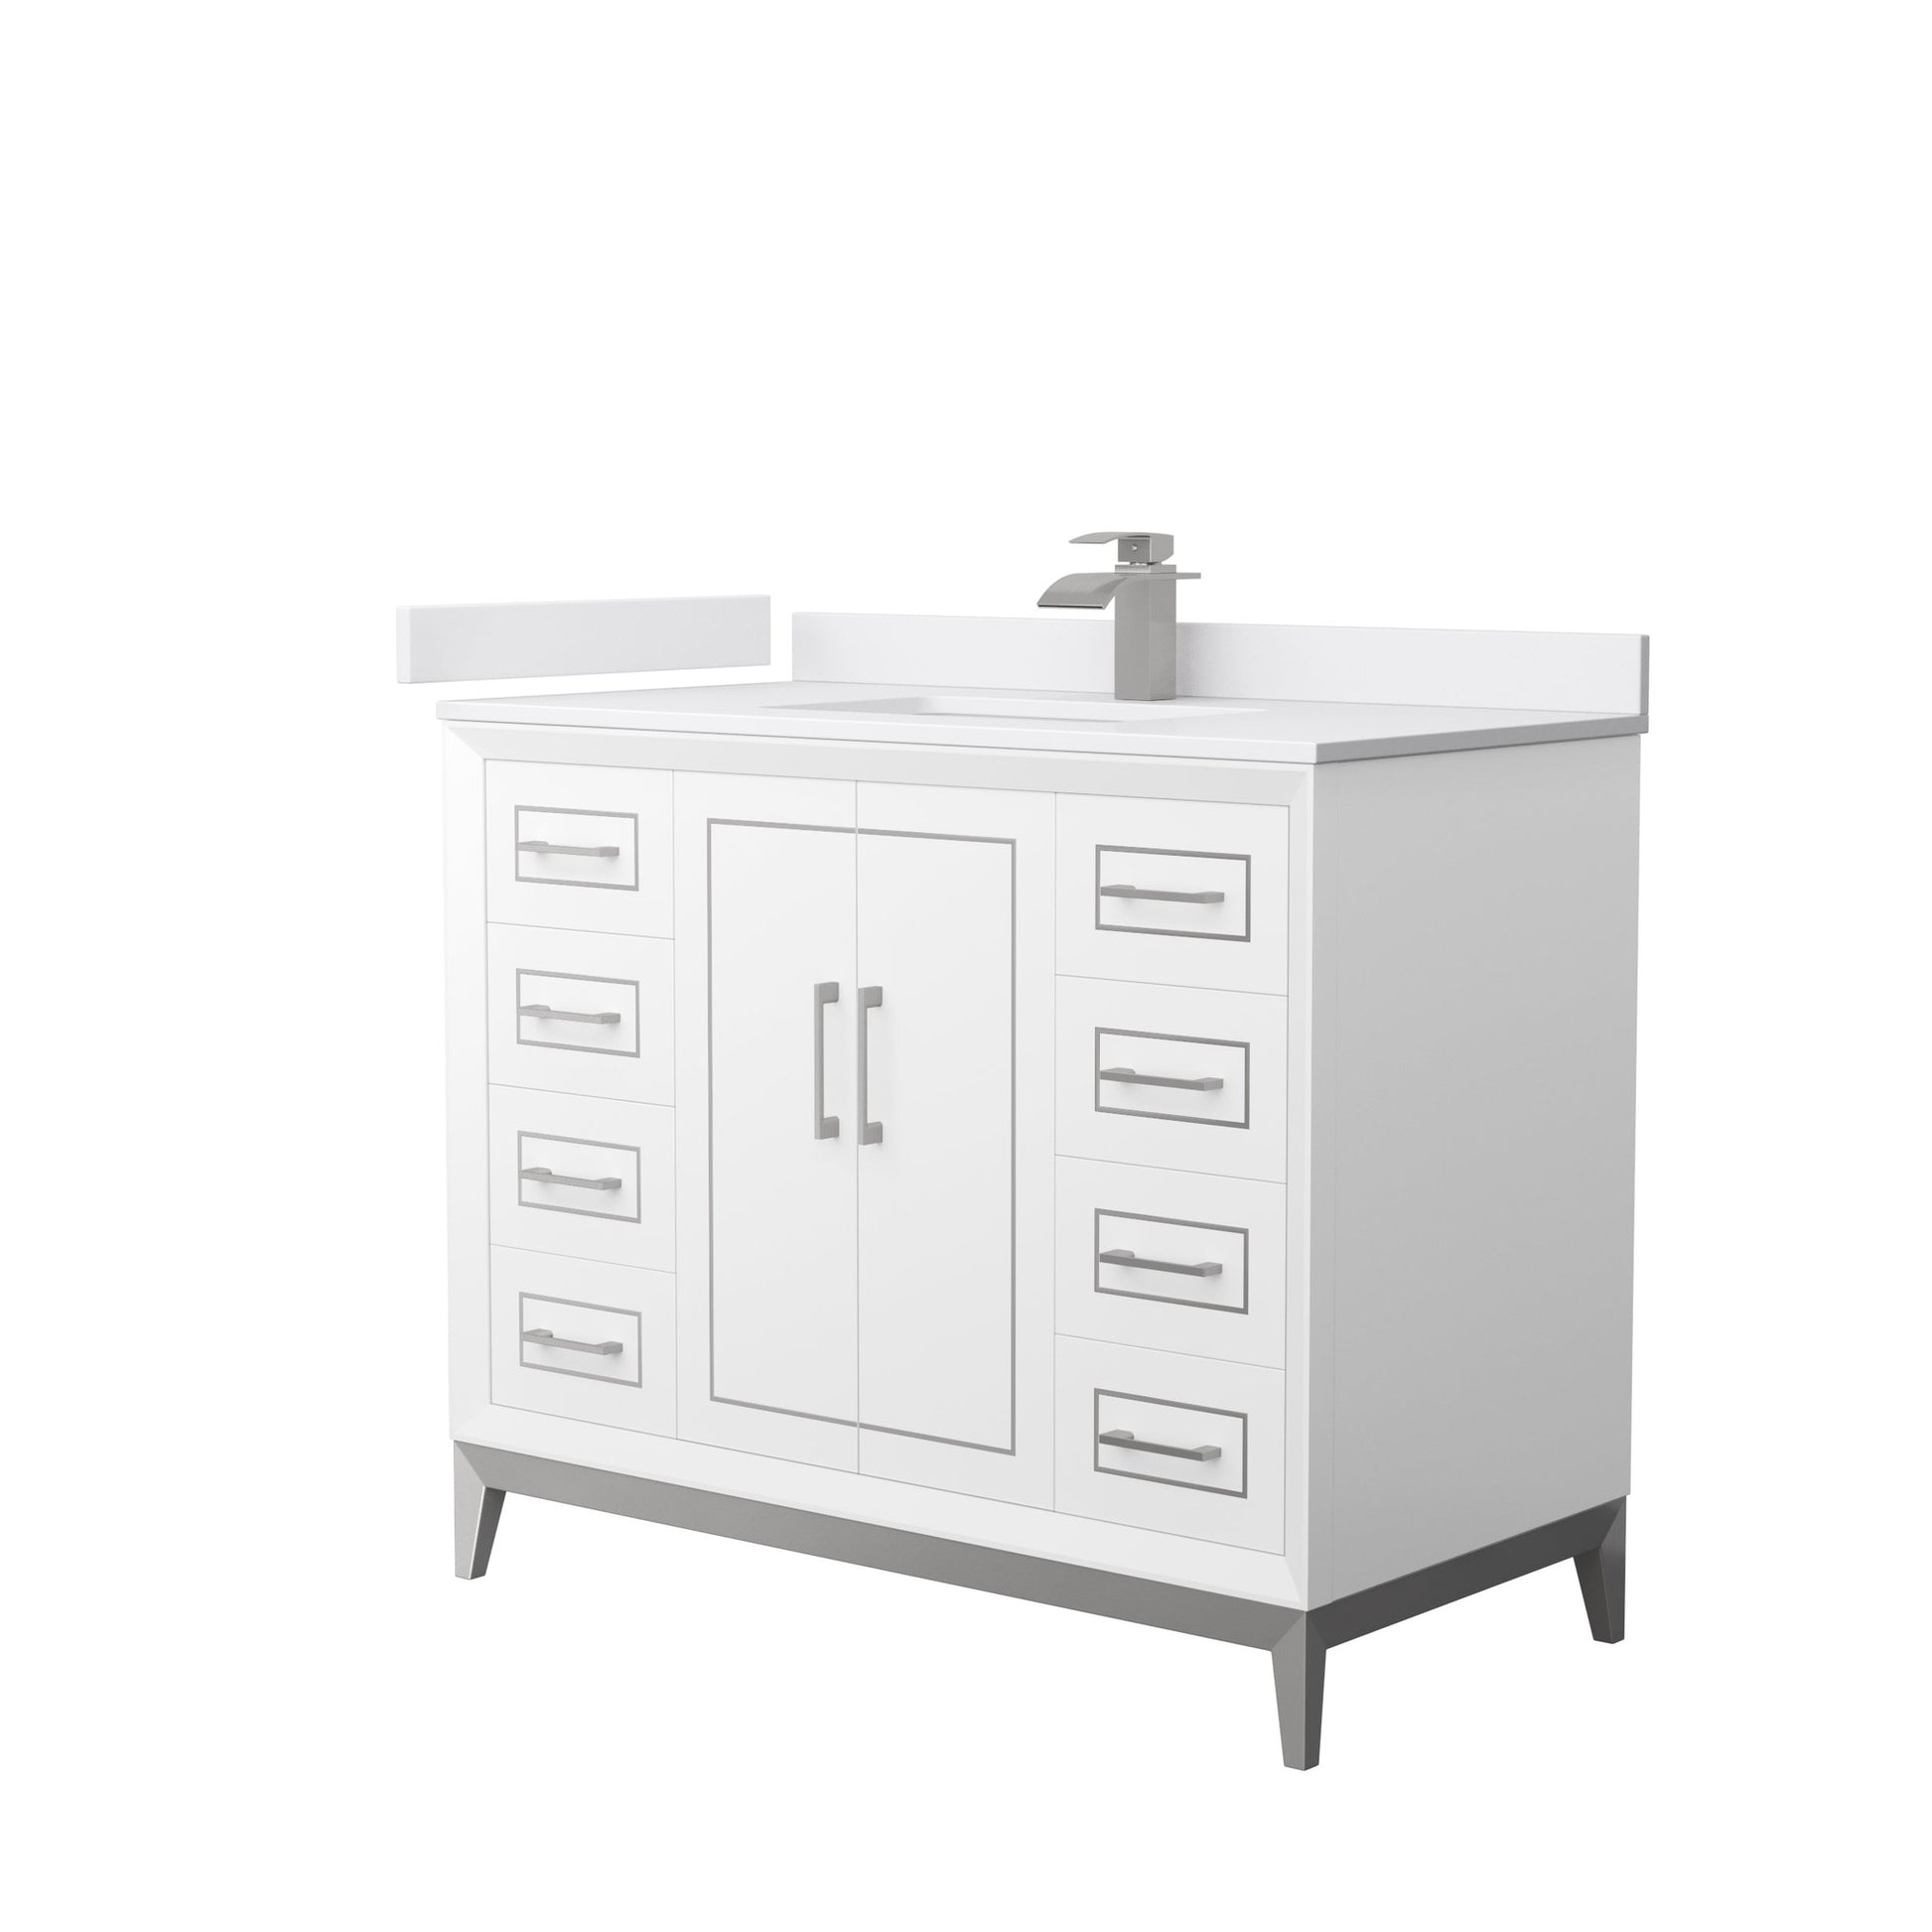 Wyndham Collection Marlena 42" Single Bathroom Vanity in White, White Cultured Marble Countertop, Undermount Square Sink, Brushed Nickel Trim